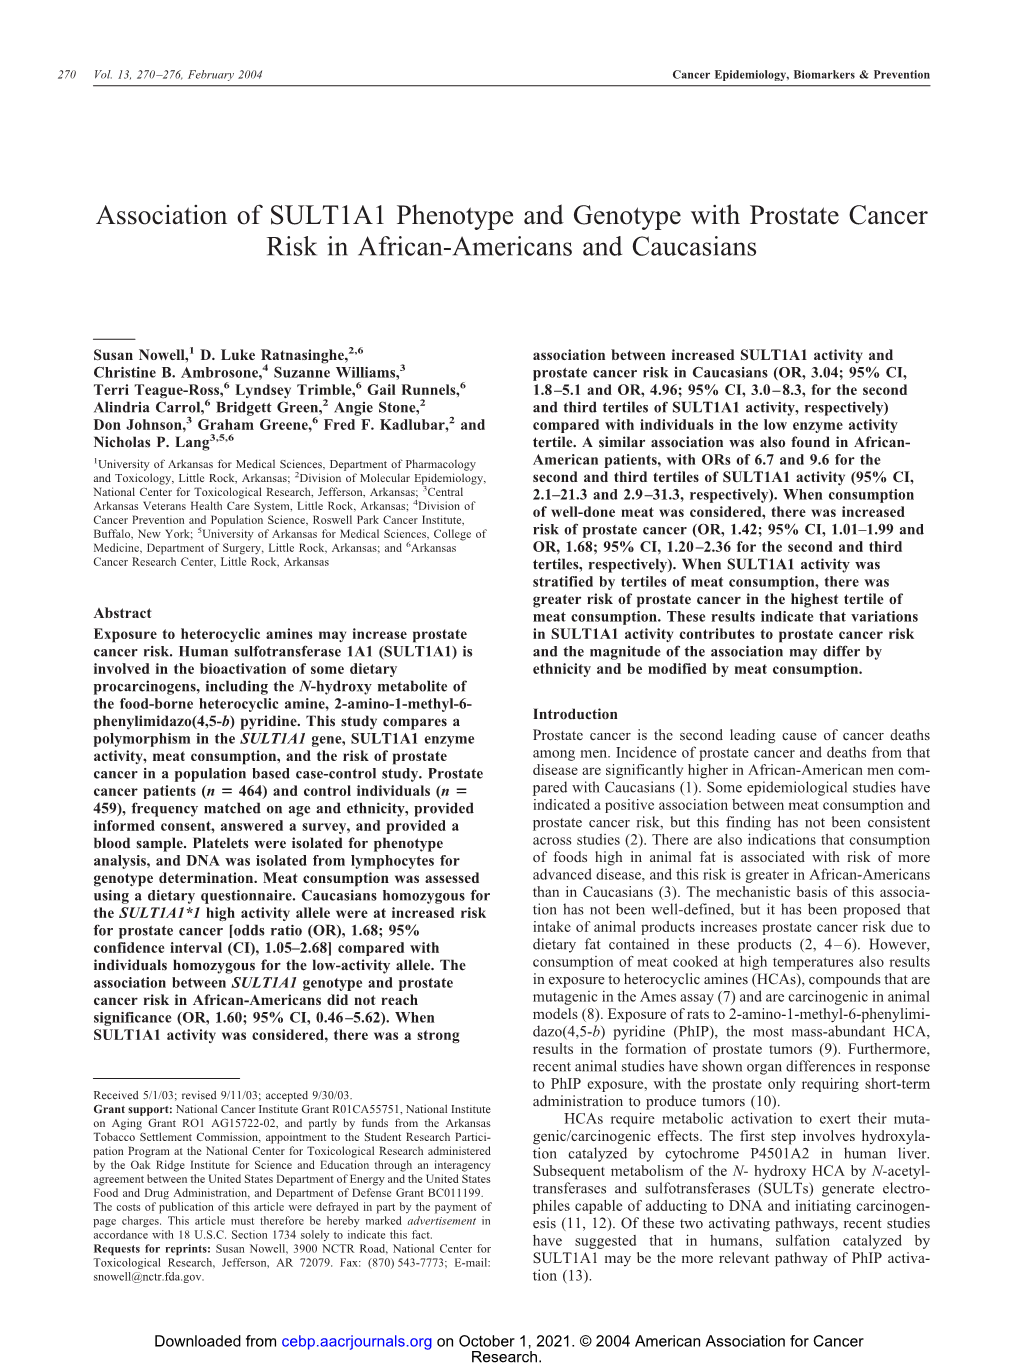 Association of SULT1A1 Phenotype and Genotype with Prostate Cancer Risk in African-Americans and Caucasians